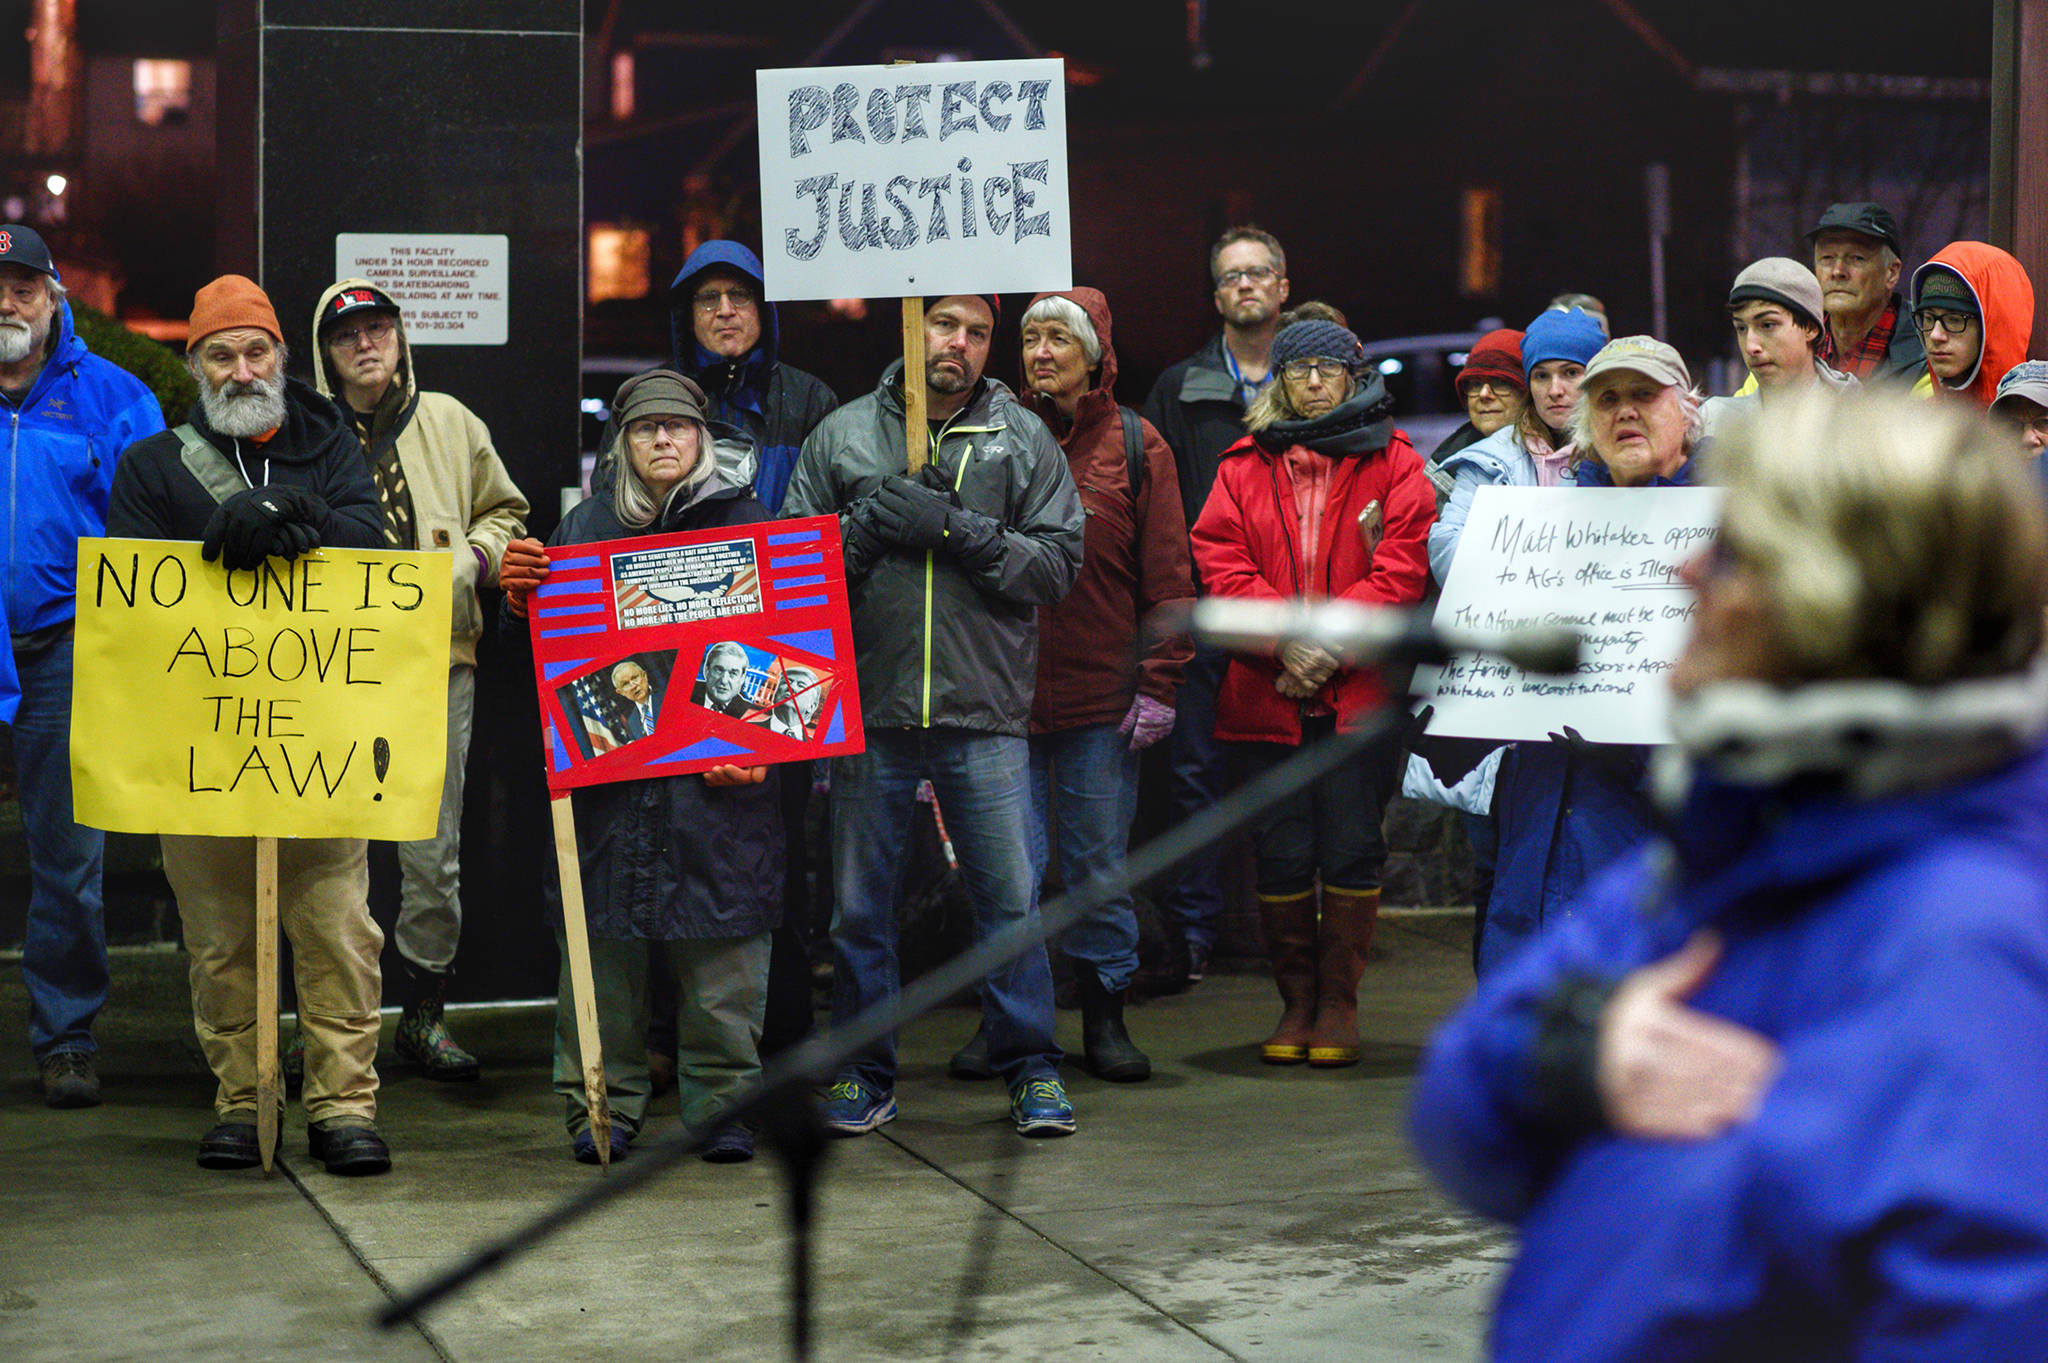 Nearly 100 people show up to protest President Donald Trump’s appointment of Matthew Whitaker, as former Rep. Beth Kerttula speaks outside the Federal Building on Thursday. Many protesters believe Whitaker’s hiring could jeopardize the Mueller investigation into possible connections between Trump’s presidential campaign and the Russian government. (Michael Penn | Juneau Empire)